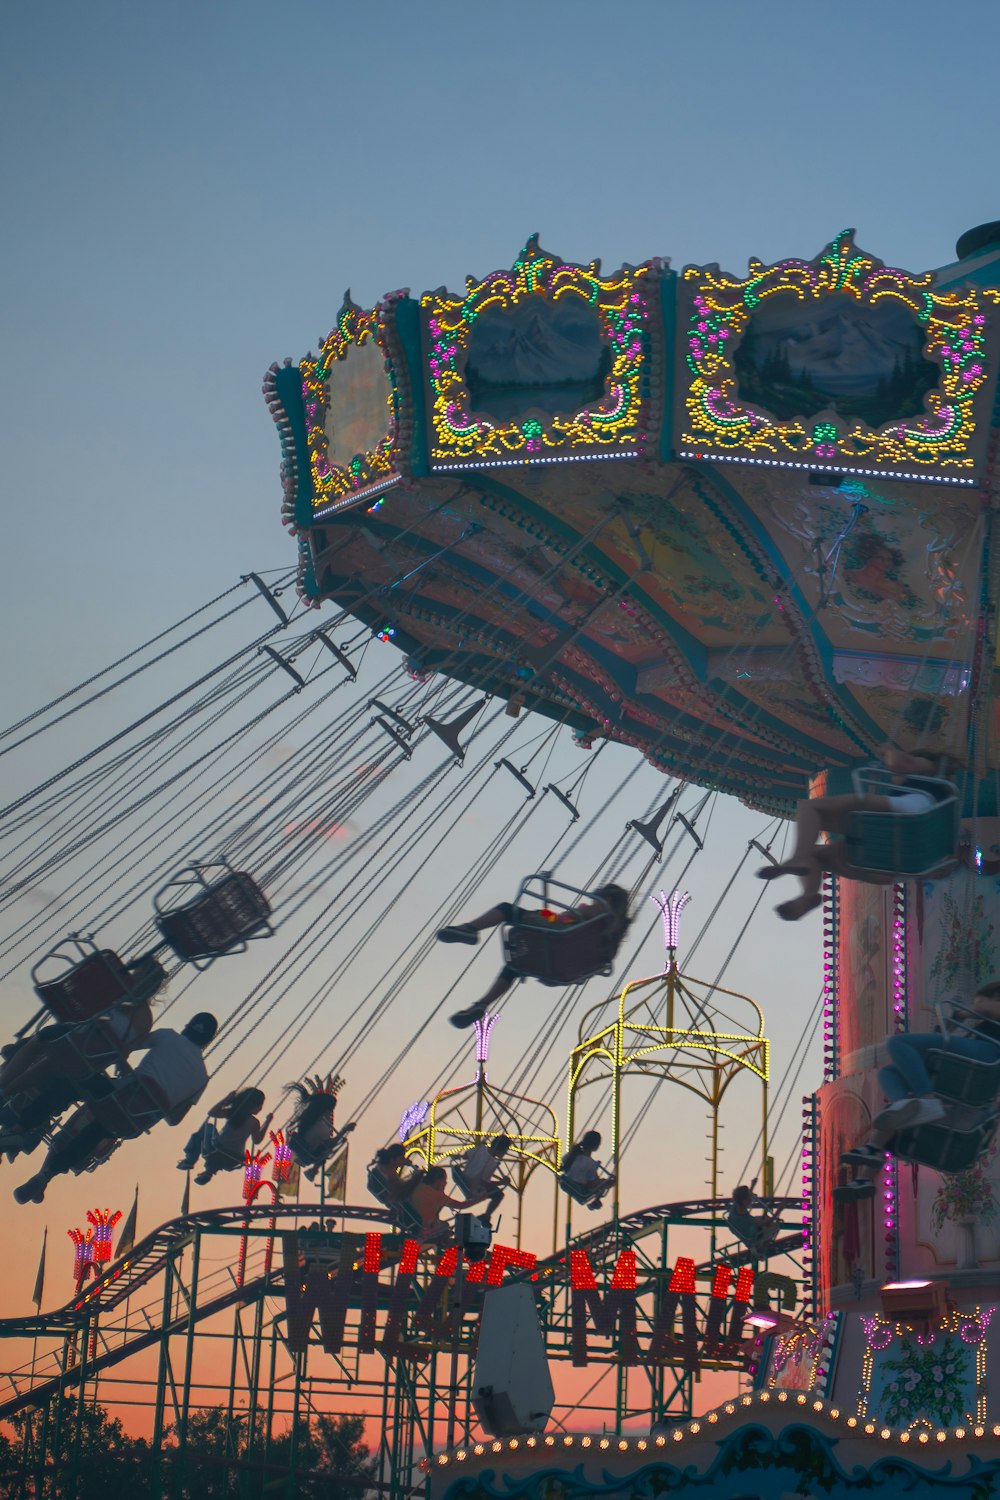 a carnival ride at dusk with people on it